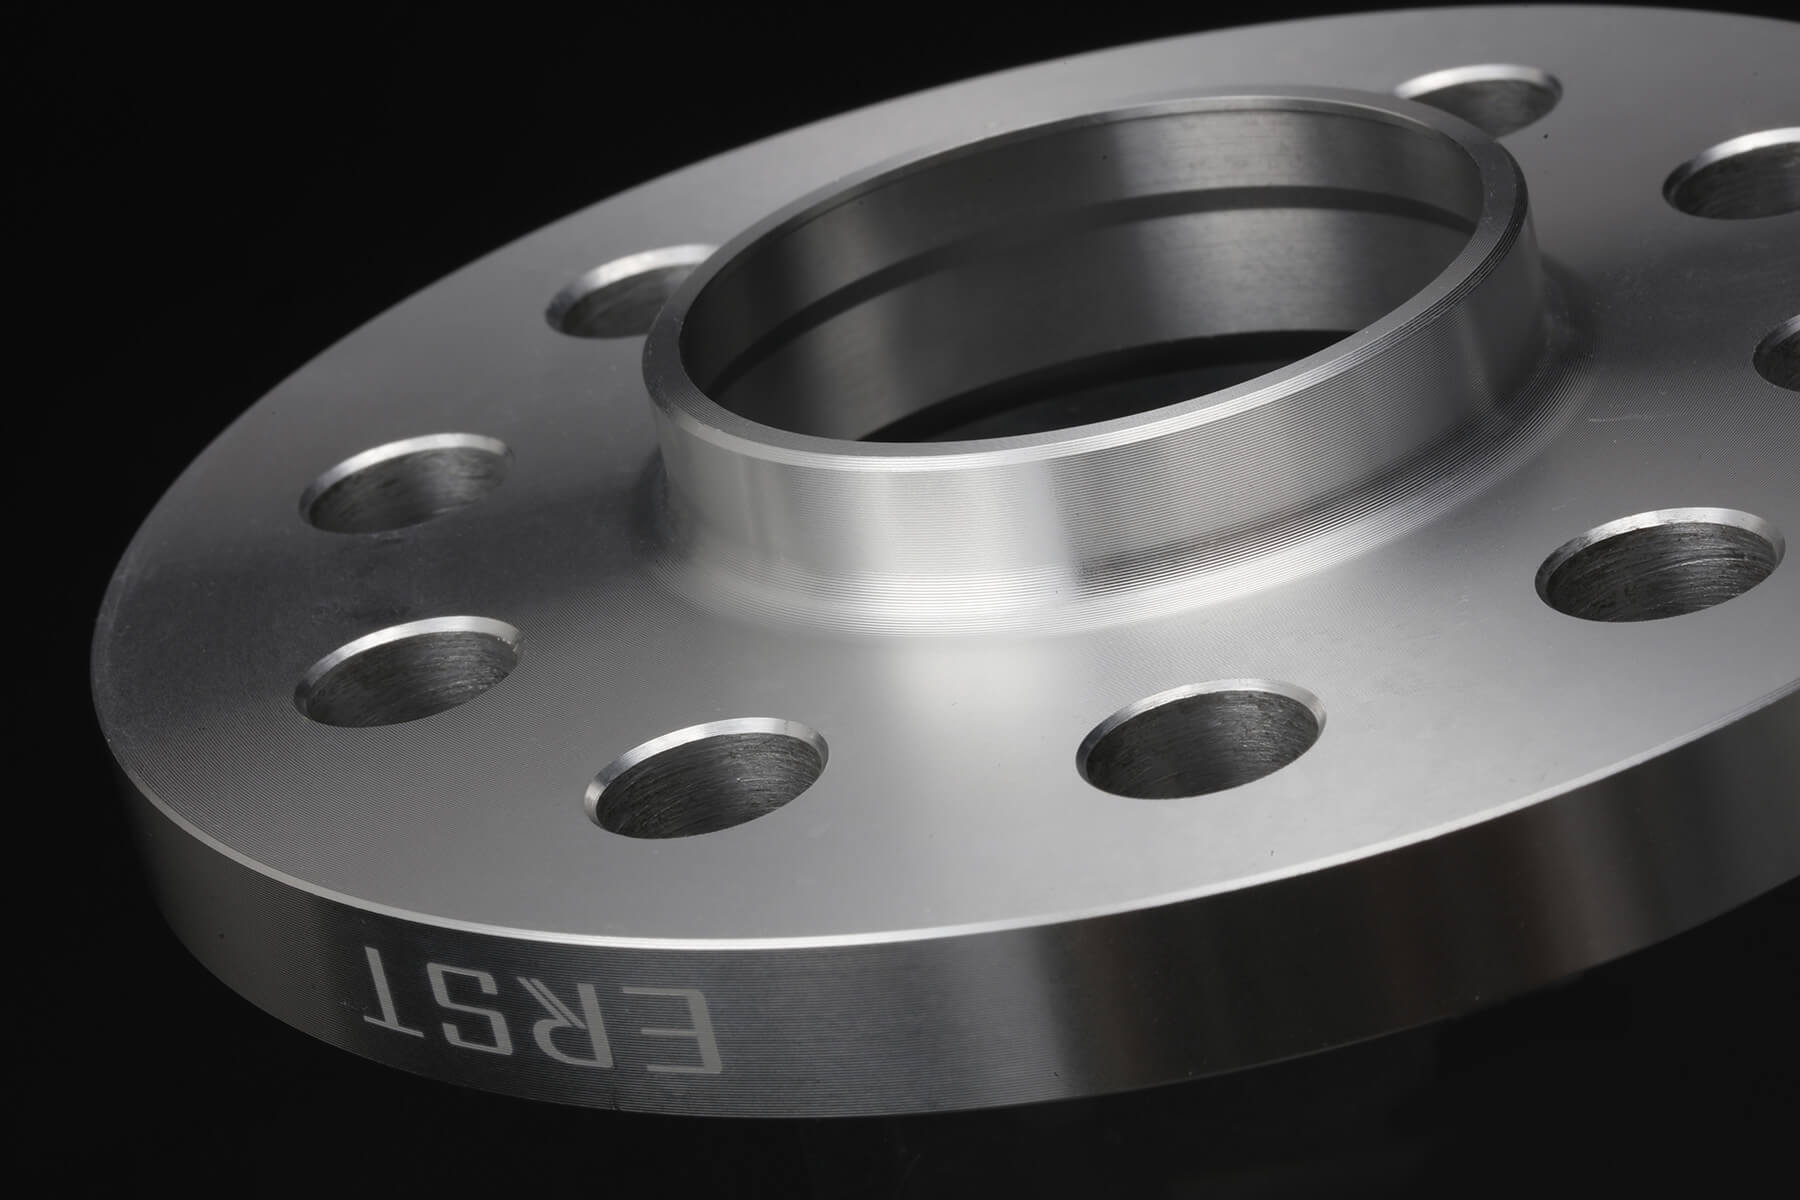 By reducing the taper of the center hub part, we increased matching rates for most of wheels.